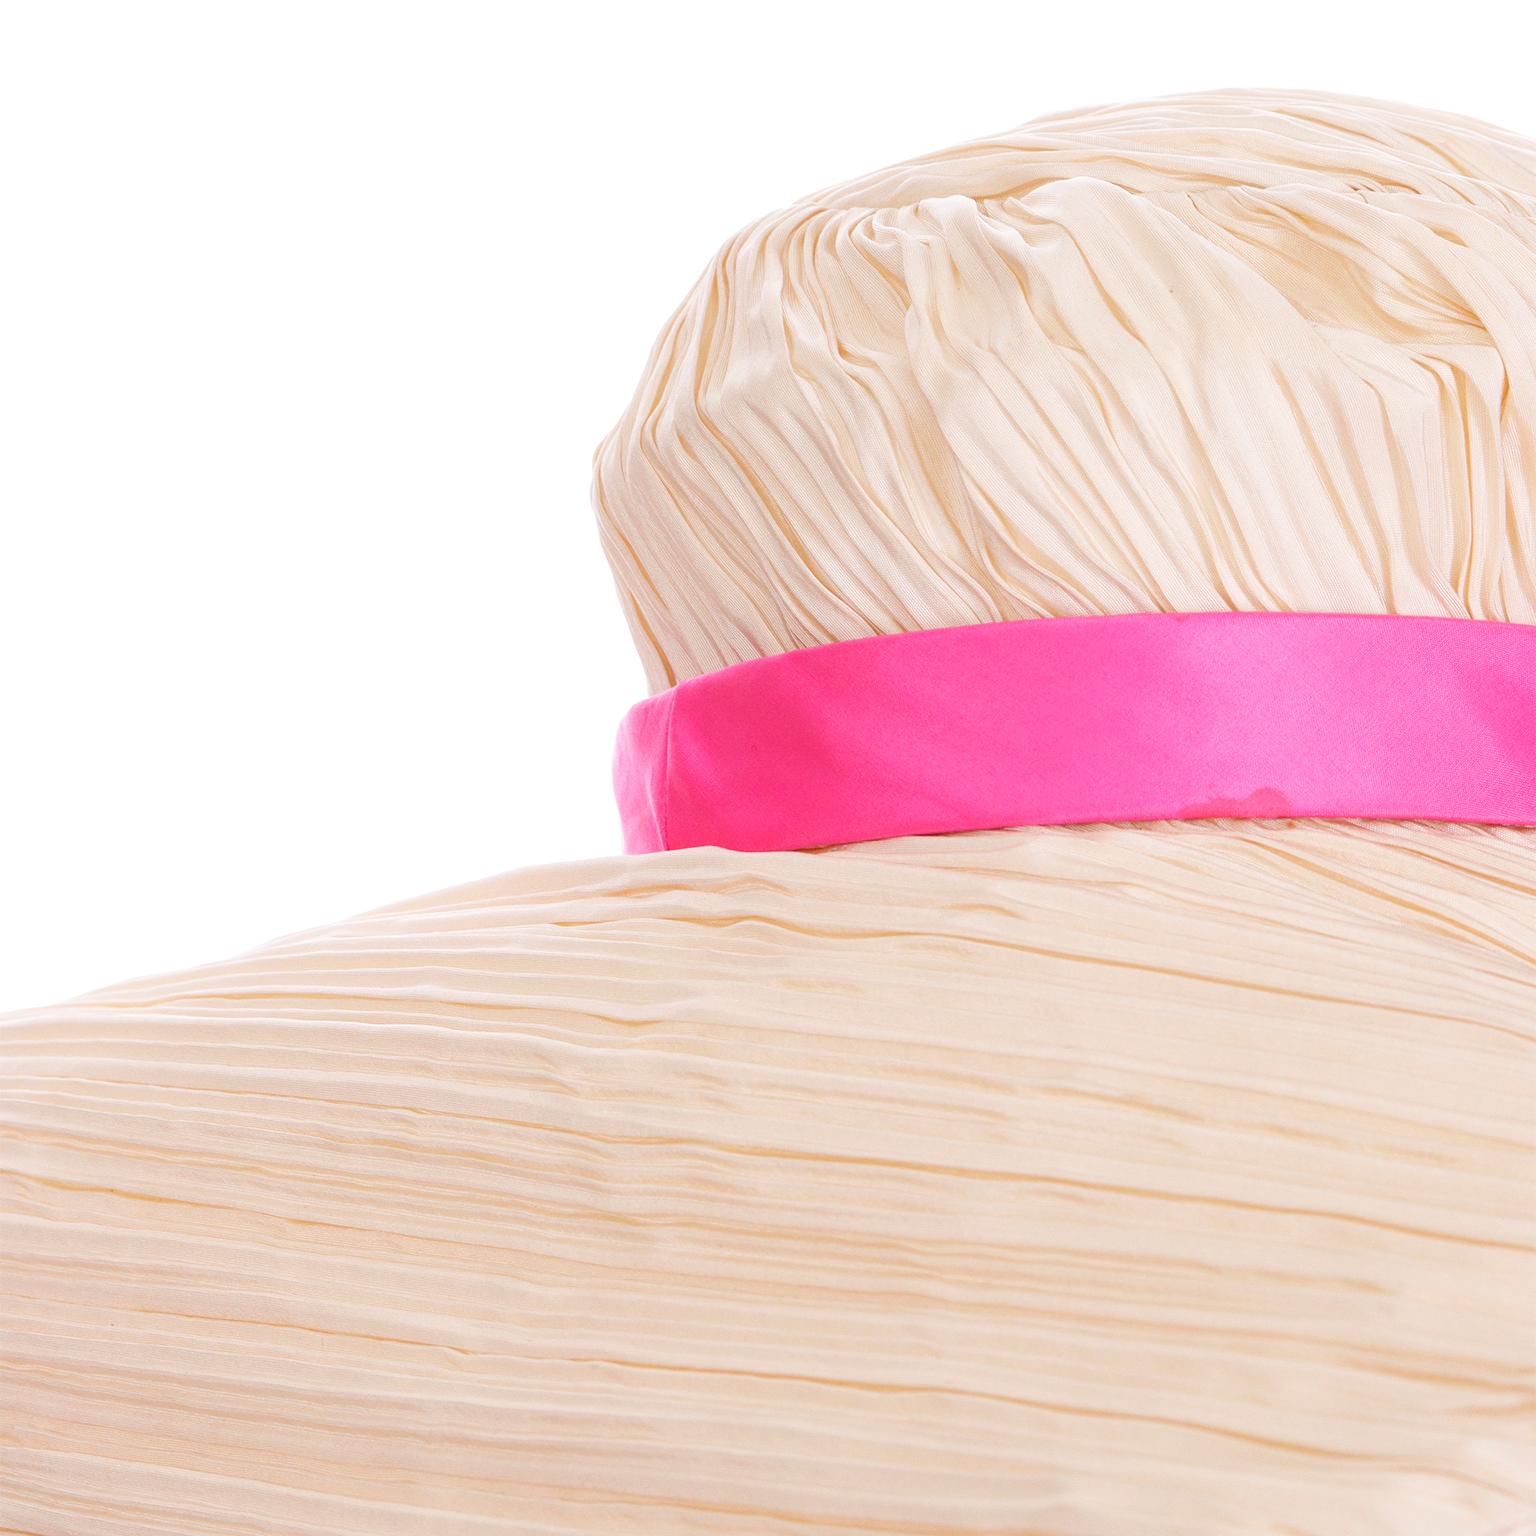 Mr John Vintage Pleated Cream Floppy Hat With Hot Pink Silk Band Ribbon In Good Condition For Sale In Portland, OR